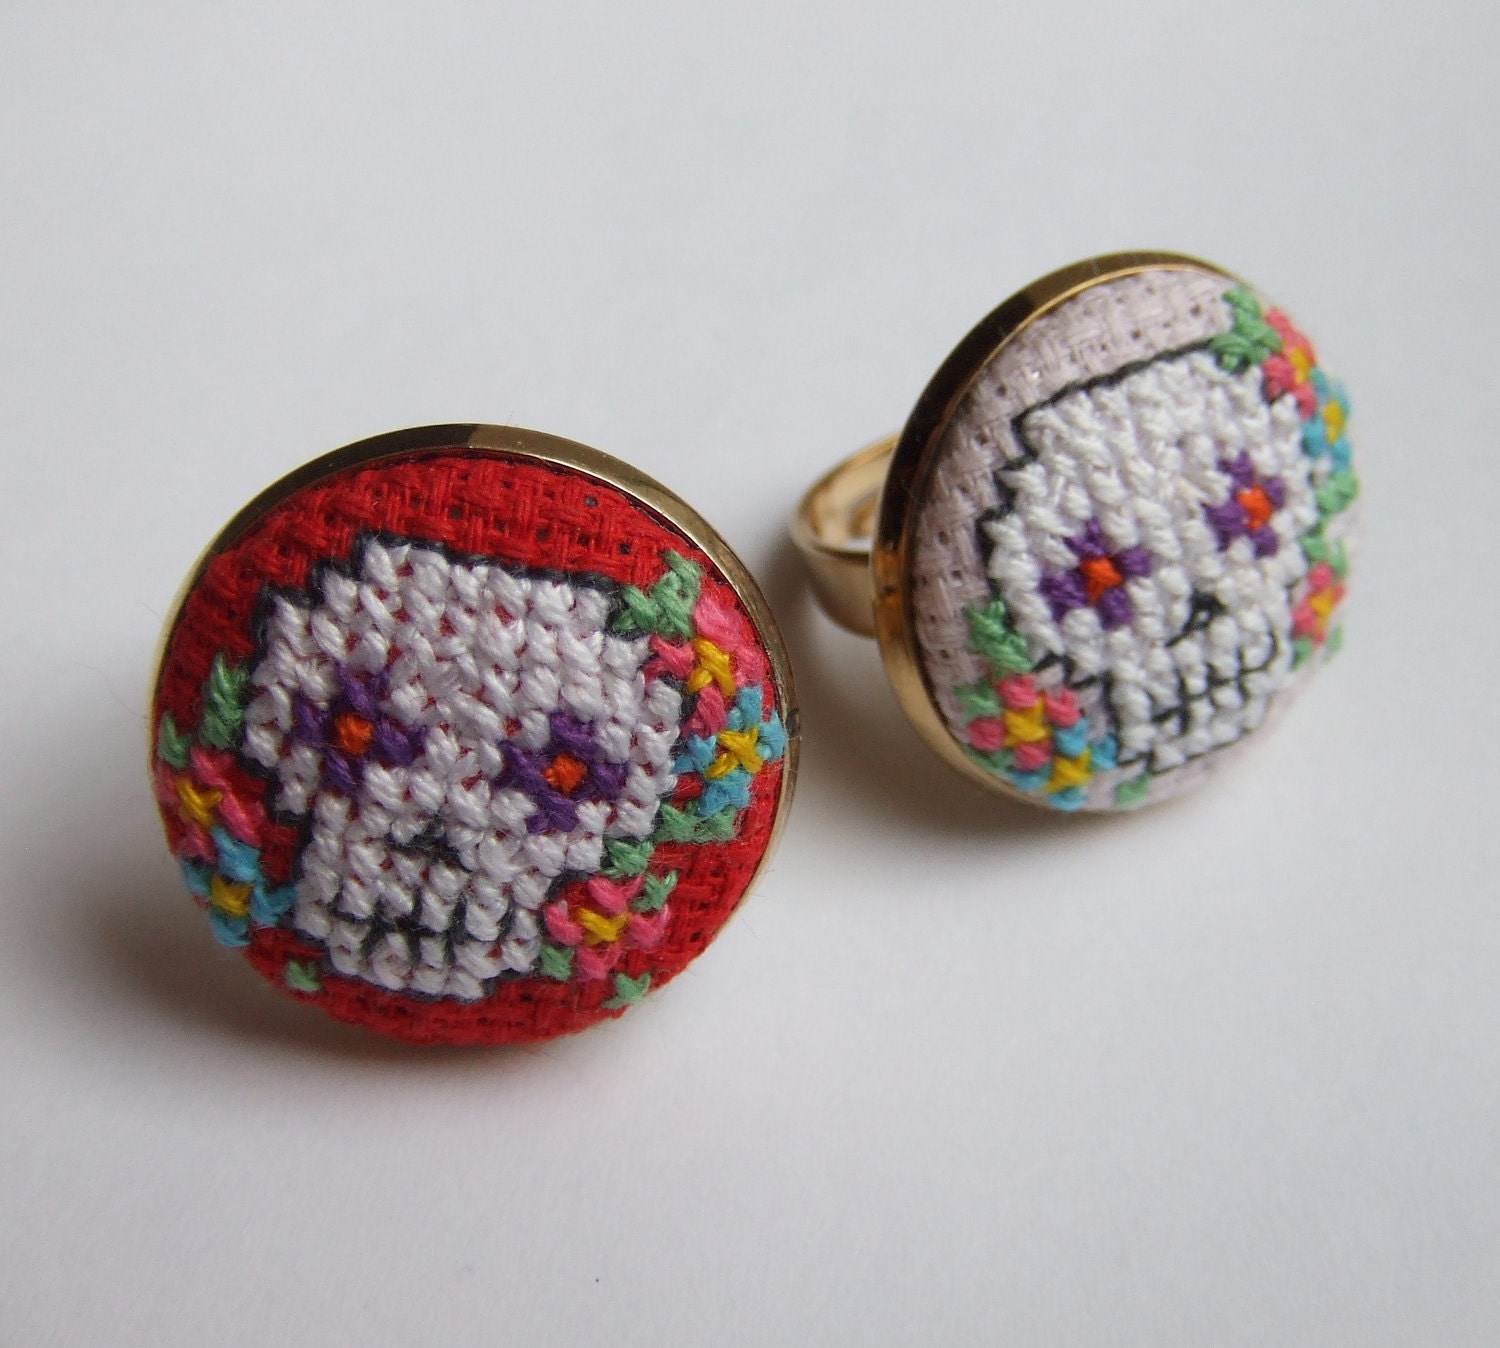 Day of The Dead Mexican Sugar Skull Cross-stitch Ring with Flowers